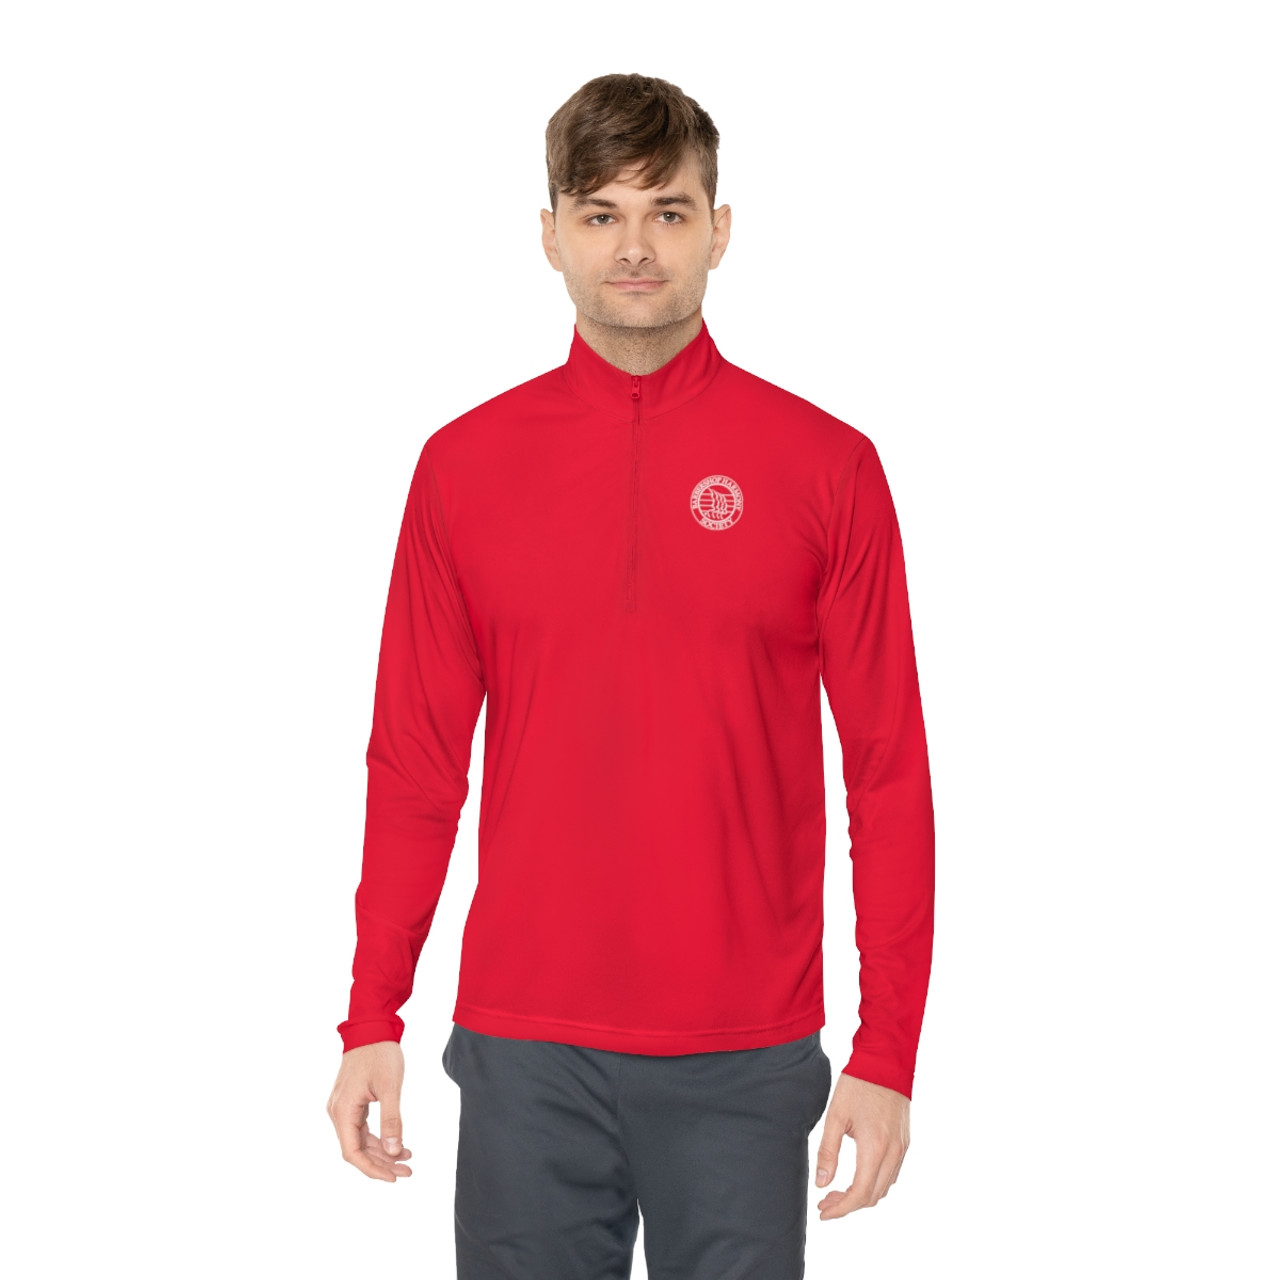 Unisex Quarter-Zip BHS Seal Pullover- Multiple Colors Available